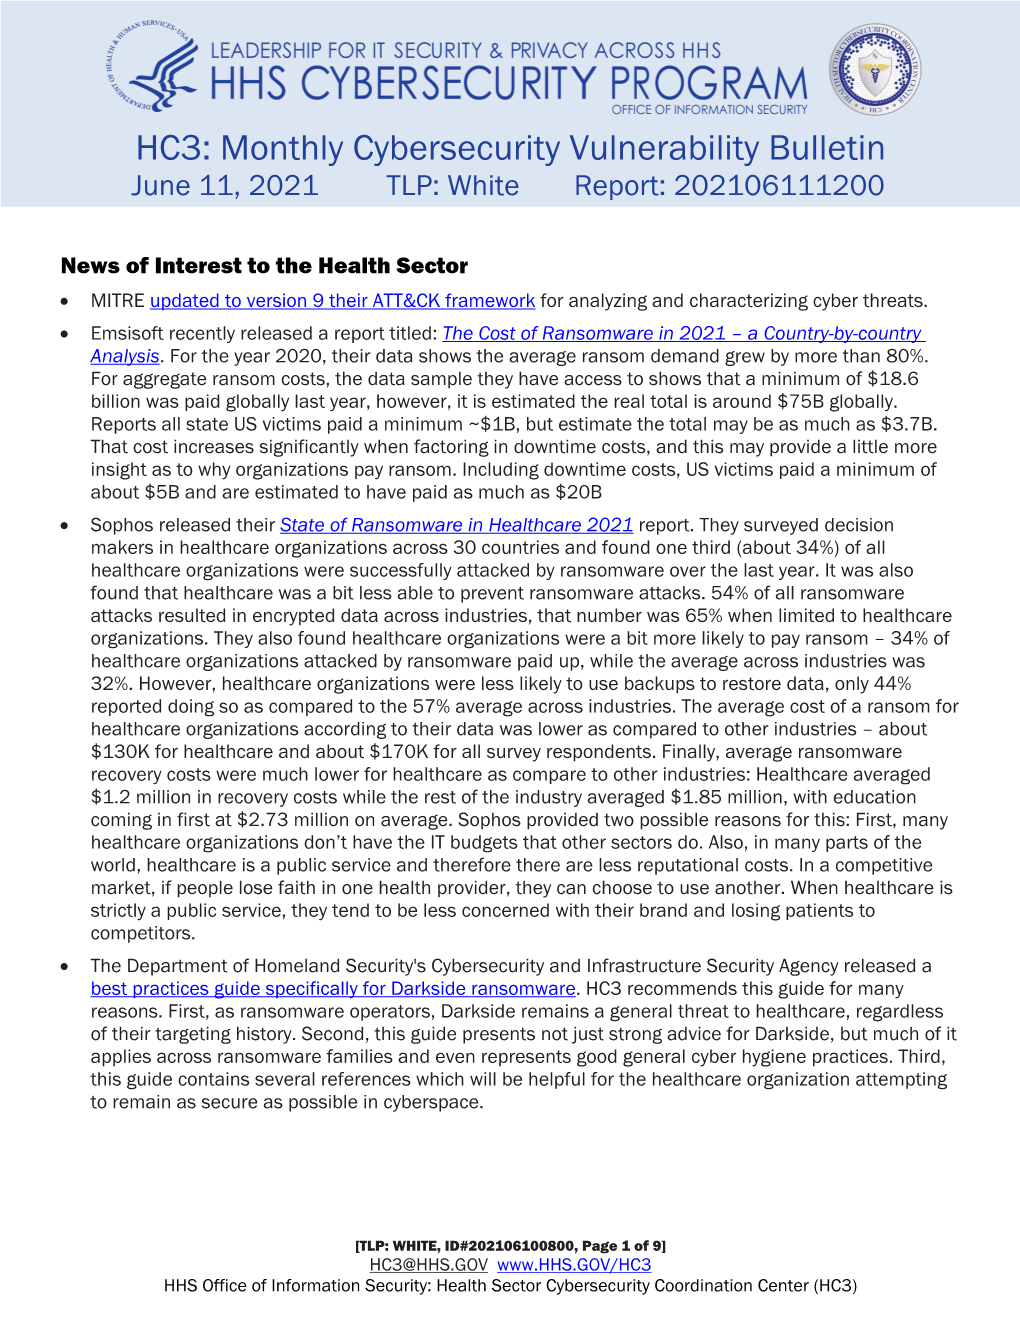 HC3: Monthly Cybersecurity Vulnerability Bulletin June 11, 2021 TLP: White Report: 202106111200